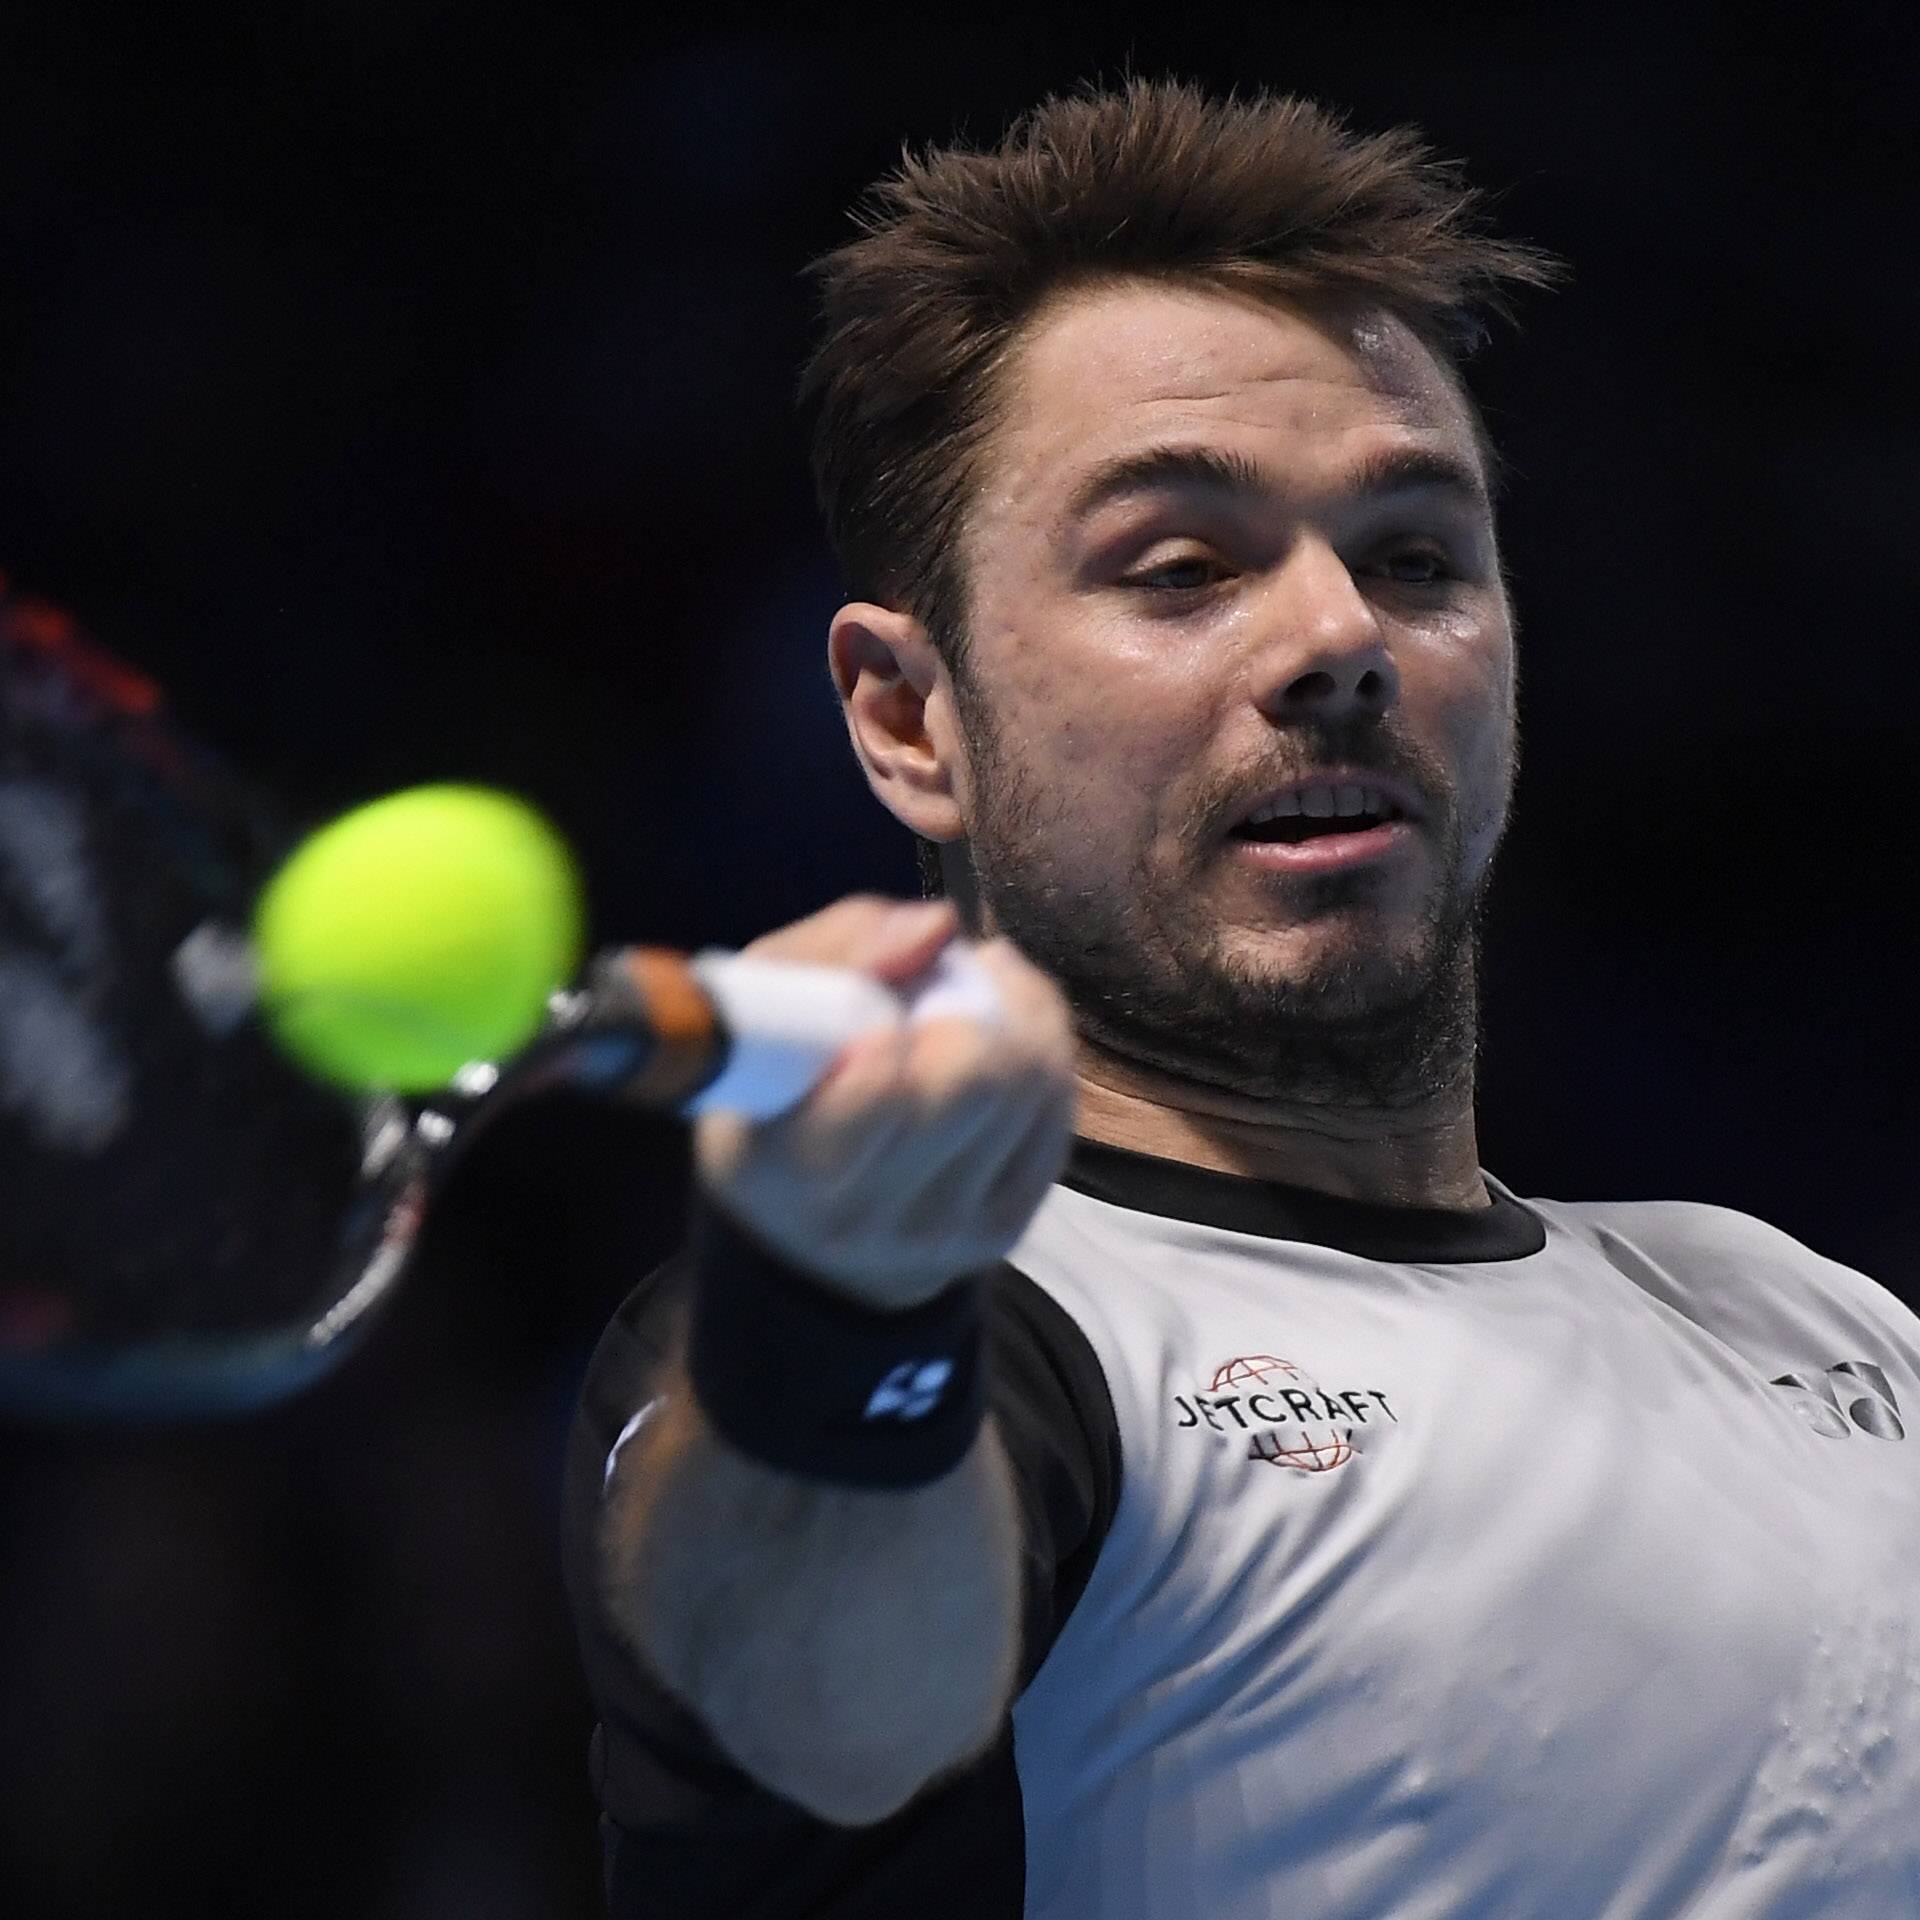 Switzerland's Stanislas Wawrinka in action during his round robin match with Croatia's Marin Cilic